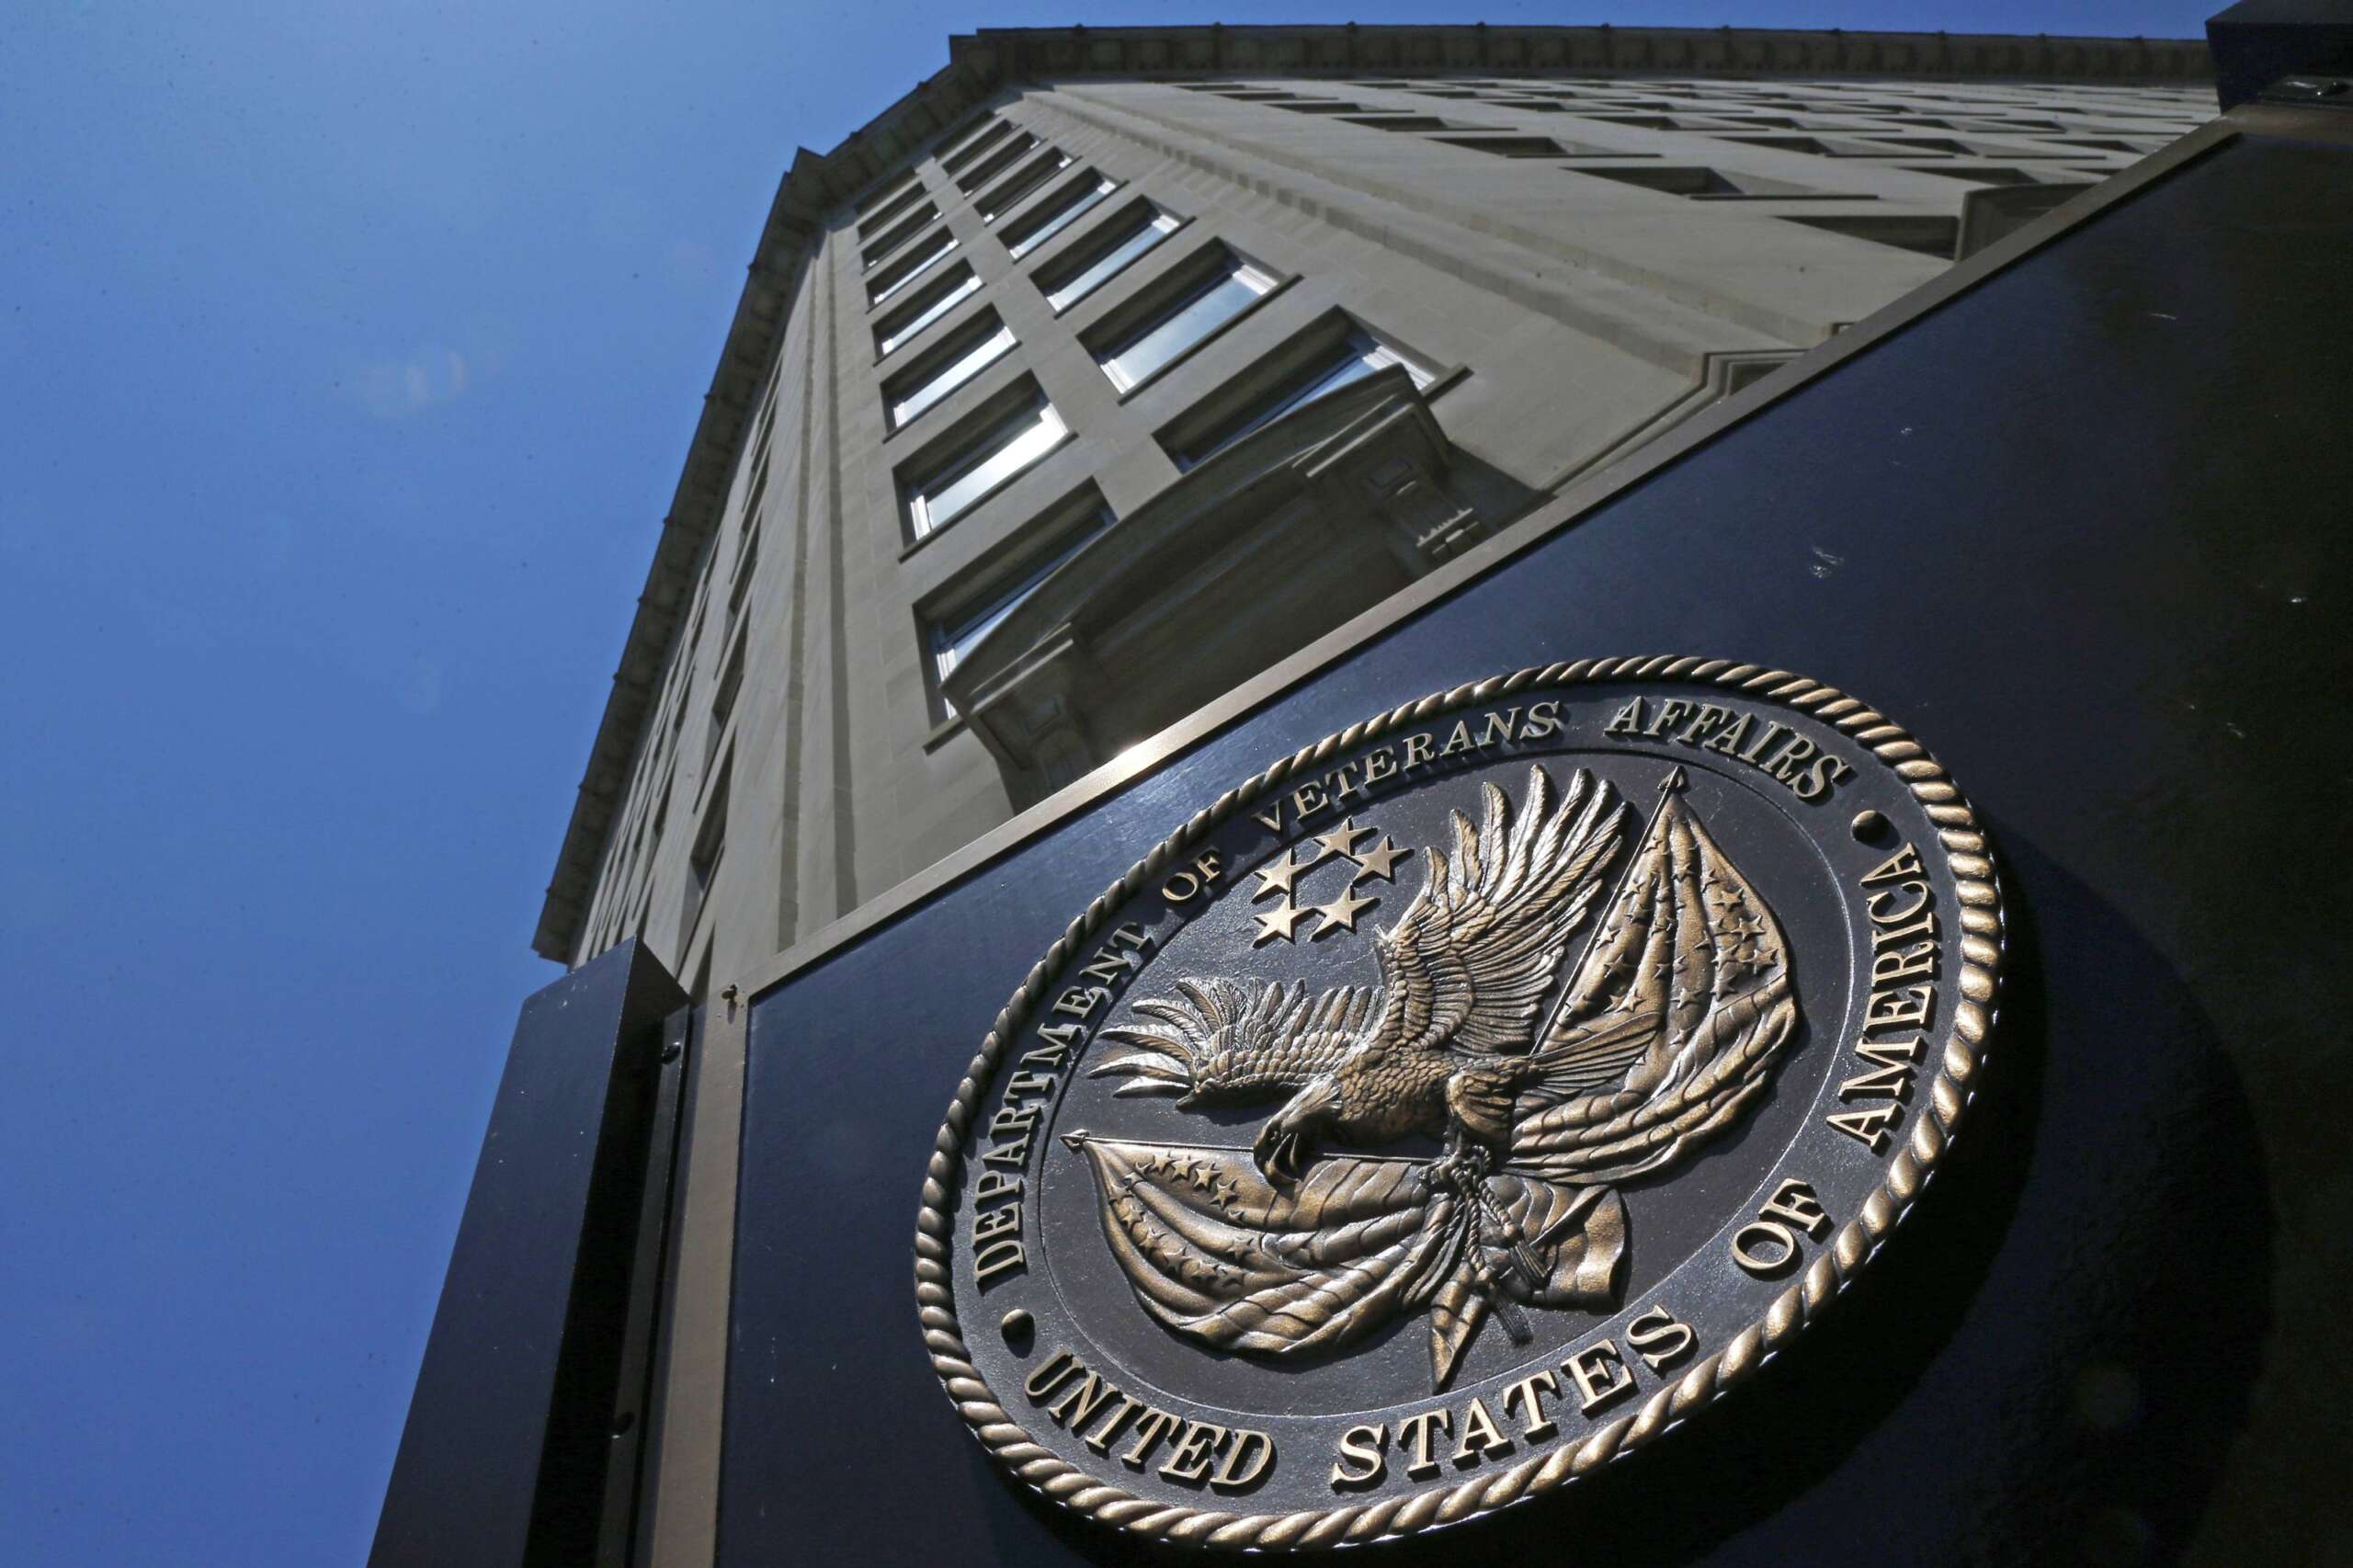 VA paid nearly $11M in bonuses to ineligible executives, watchdog finds